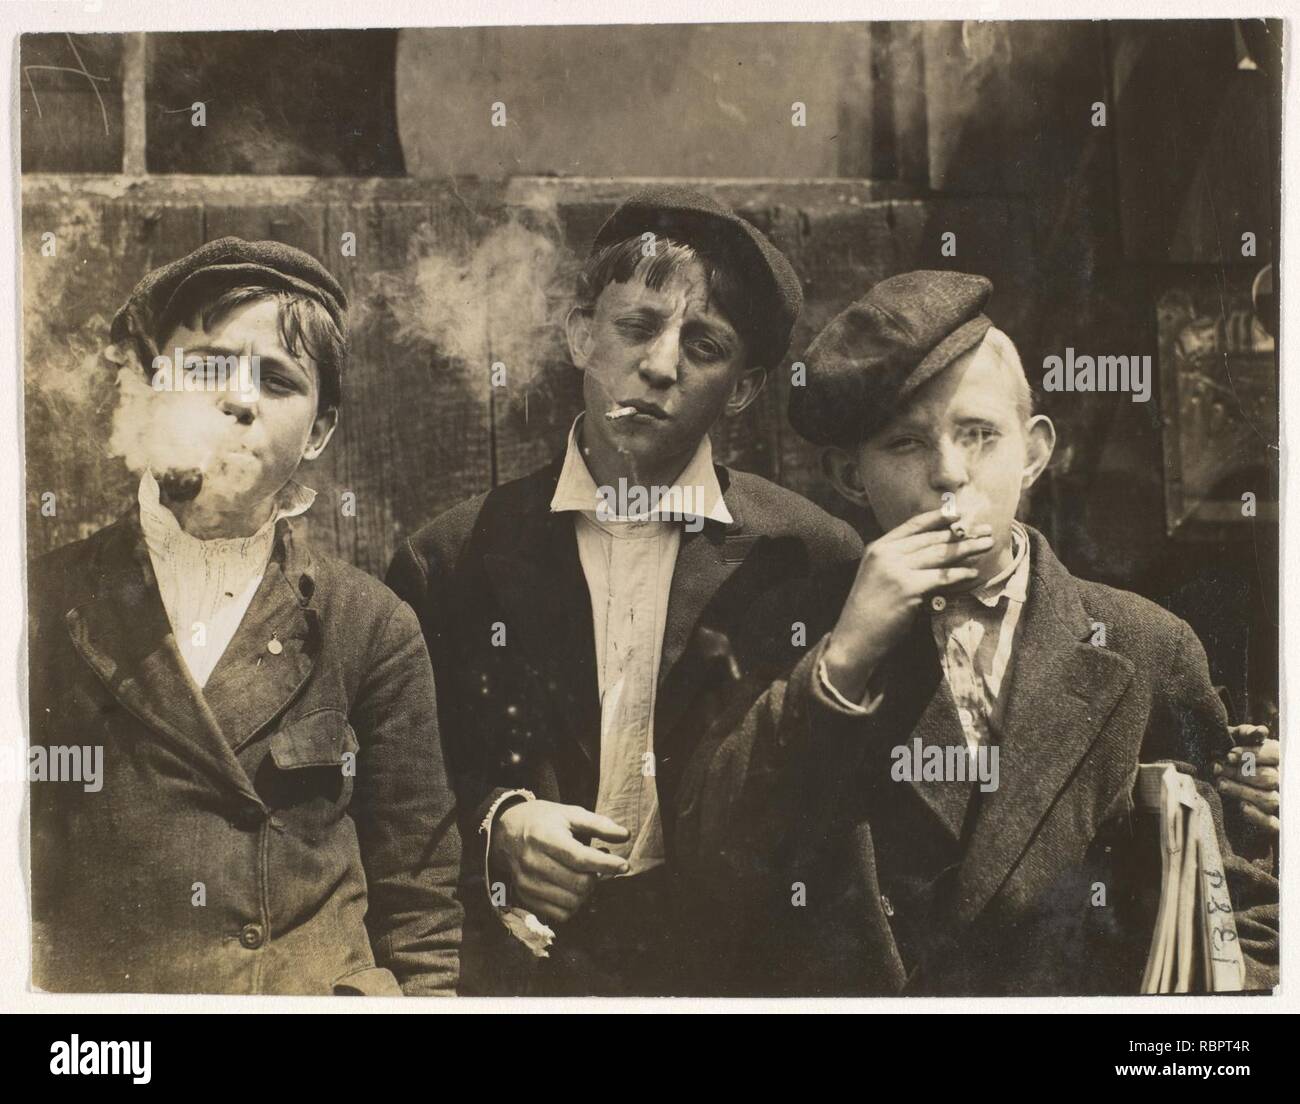 11-00 A.M. Monday, May 9th, 1910. Newsies at Skeeter's Branch, Jefferson near Franklin. They were all smoking. Location- St. Louis, Missouri. Stock Photo